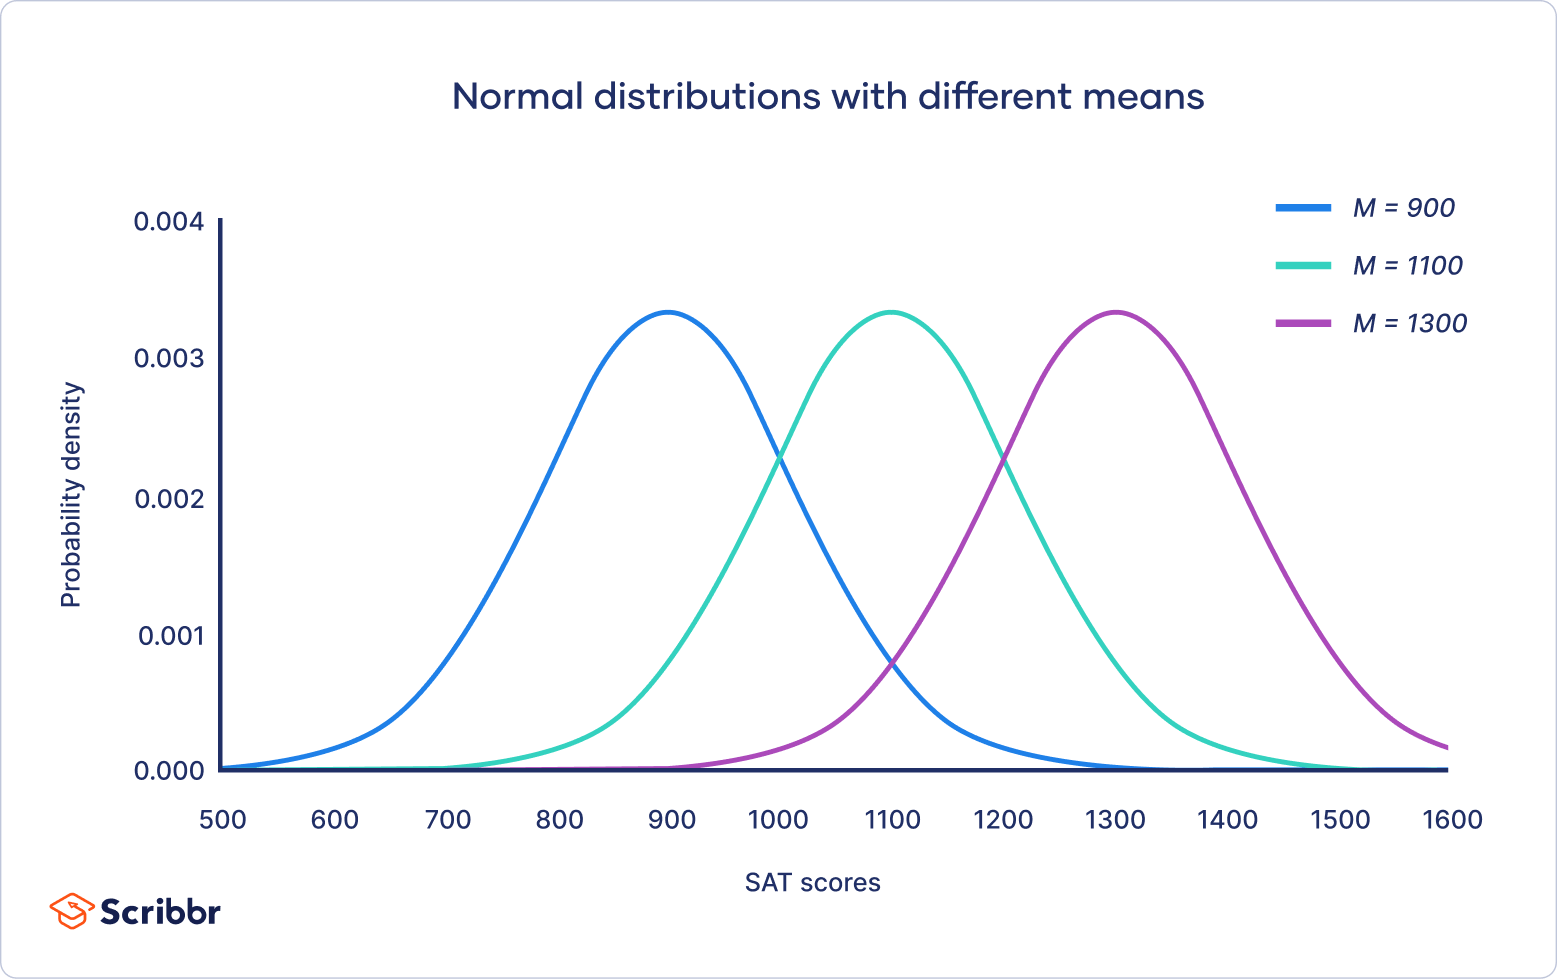 Normal distributions with different means